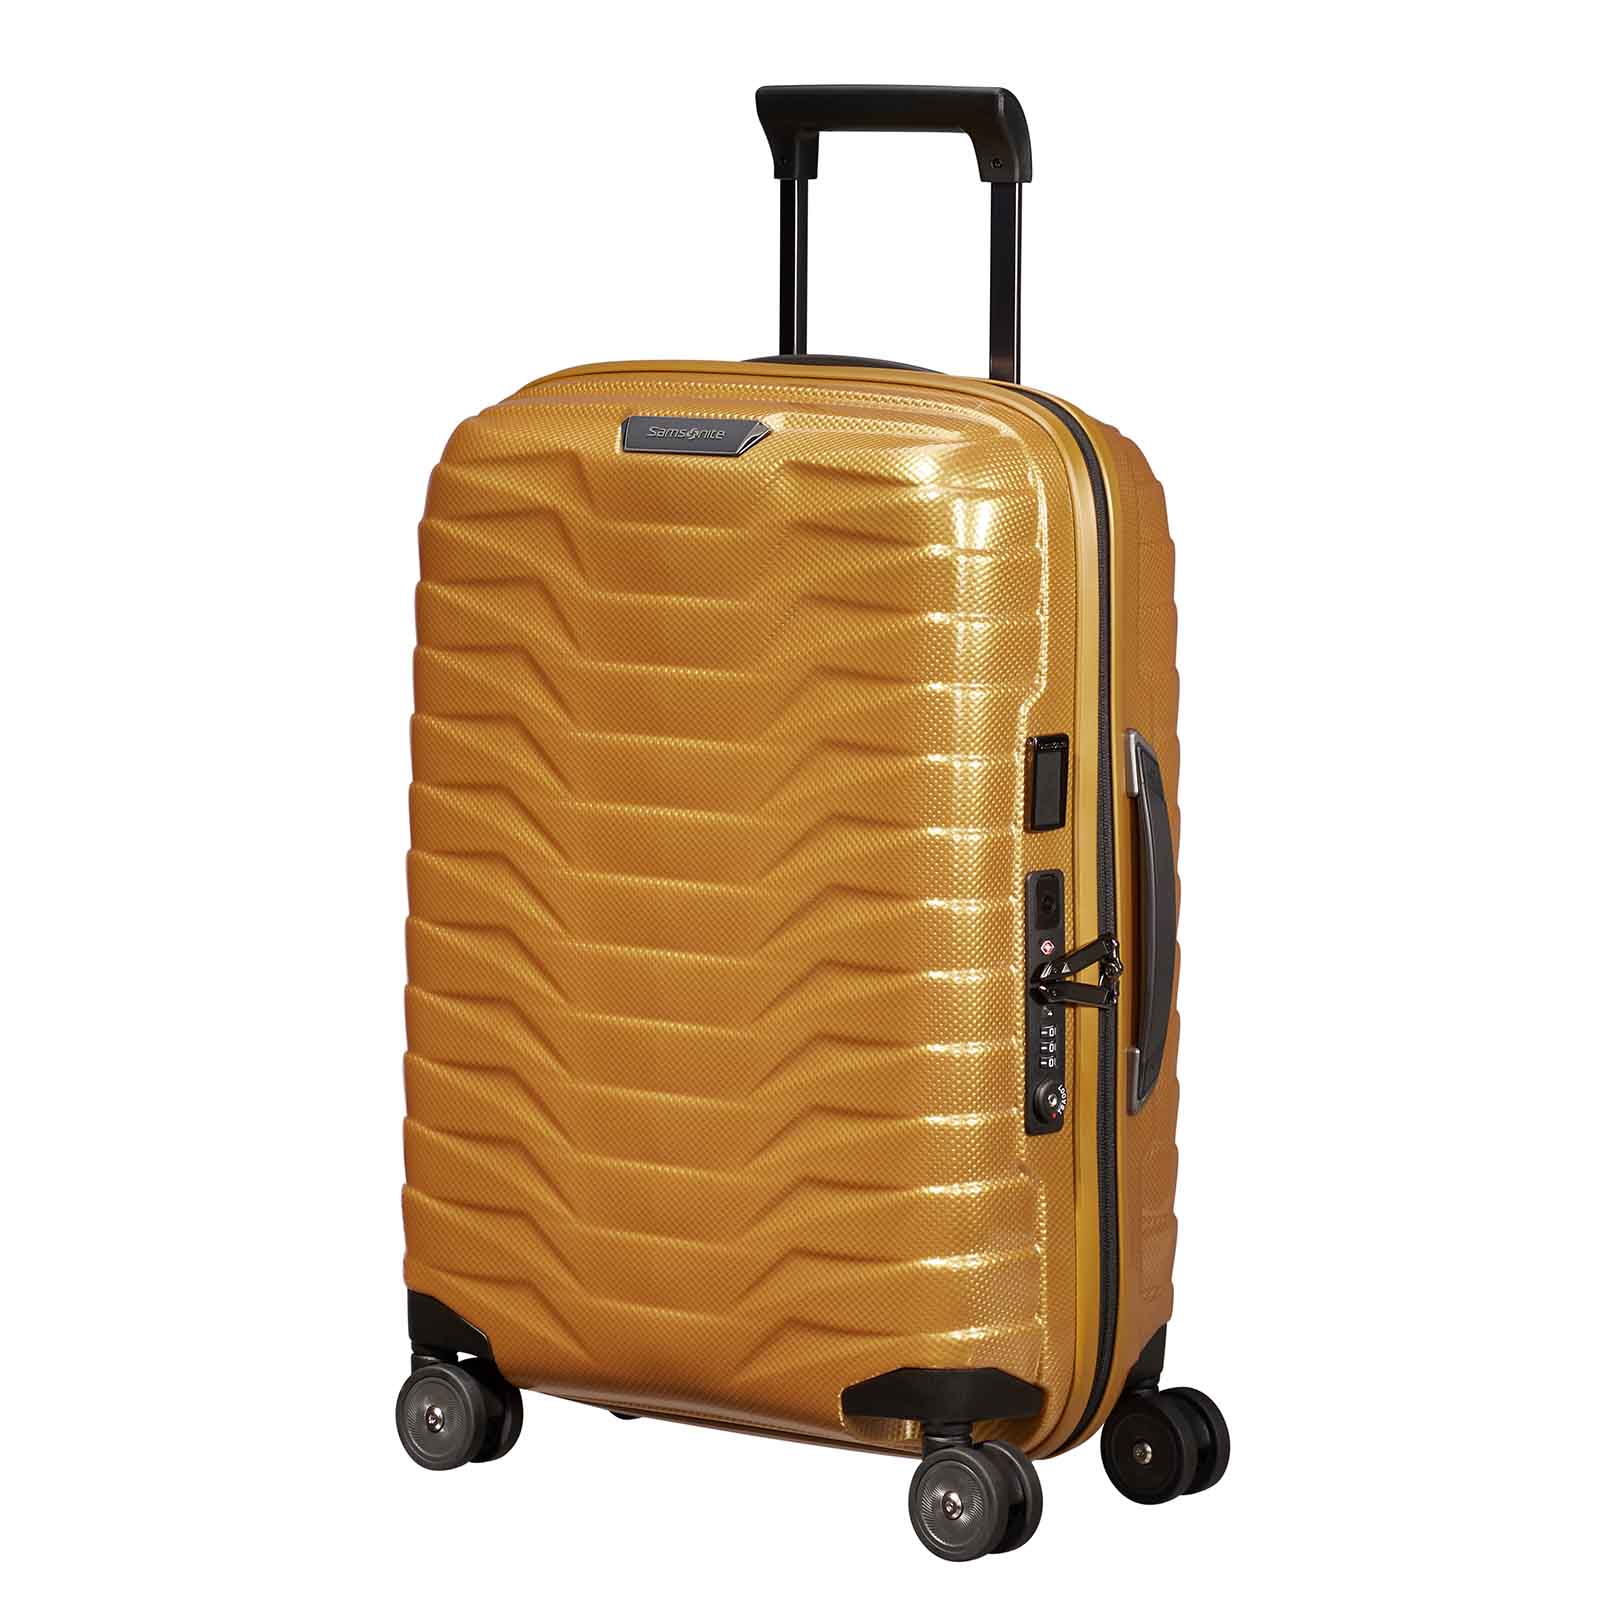 Samsonite-Proxis-55cm-Suitcase-Honey-Gold-Front-Angle